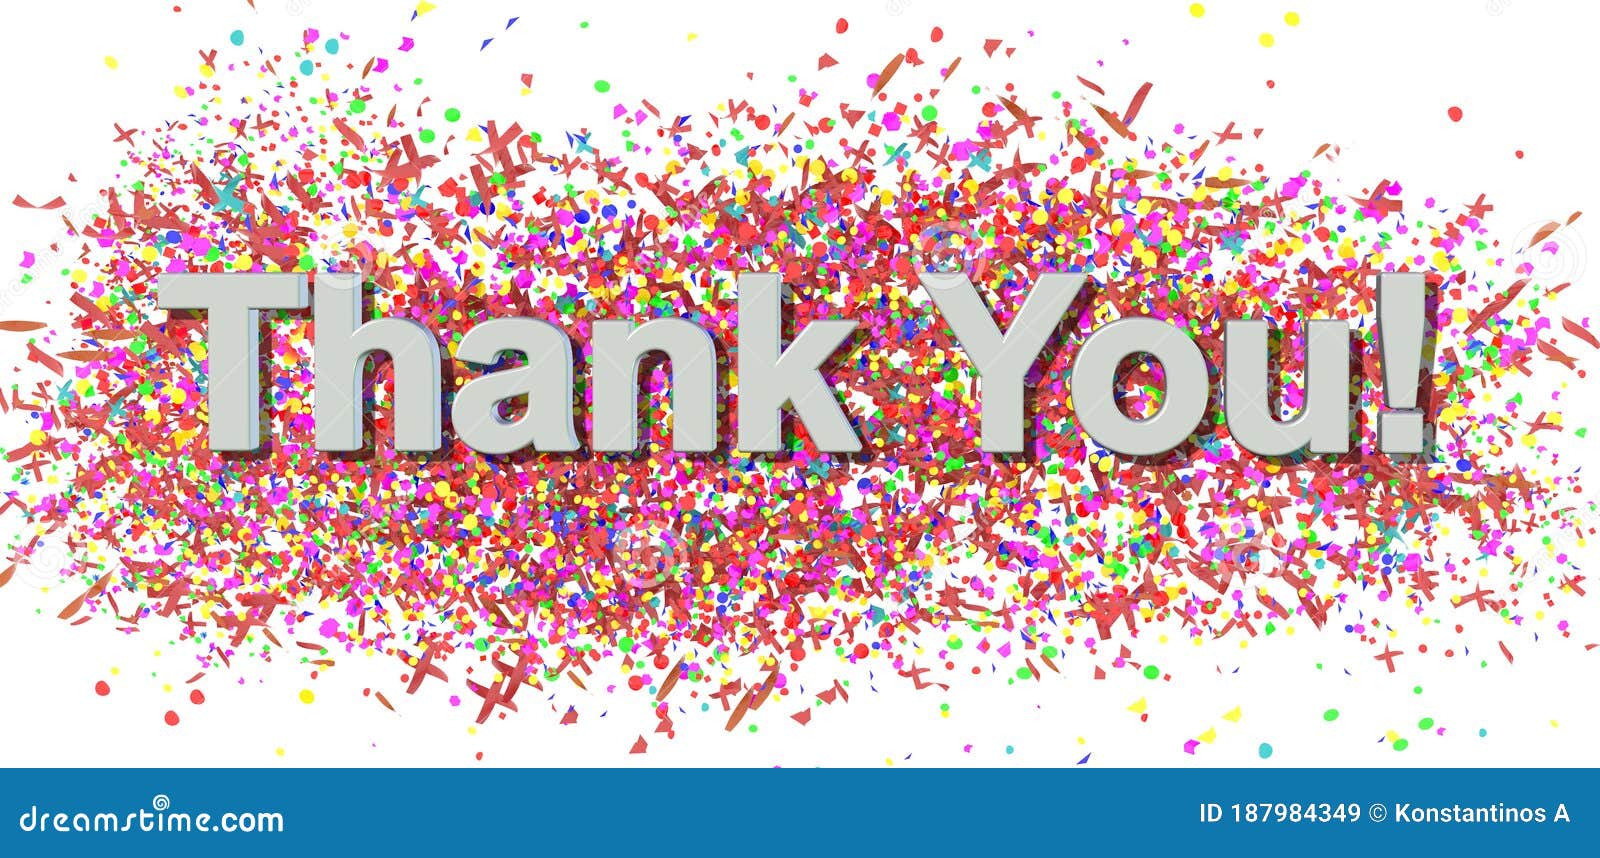 thank you carnival party confeti decoration background colors - 3d rendering